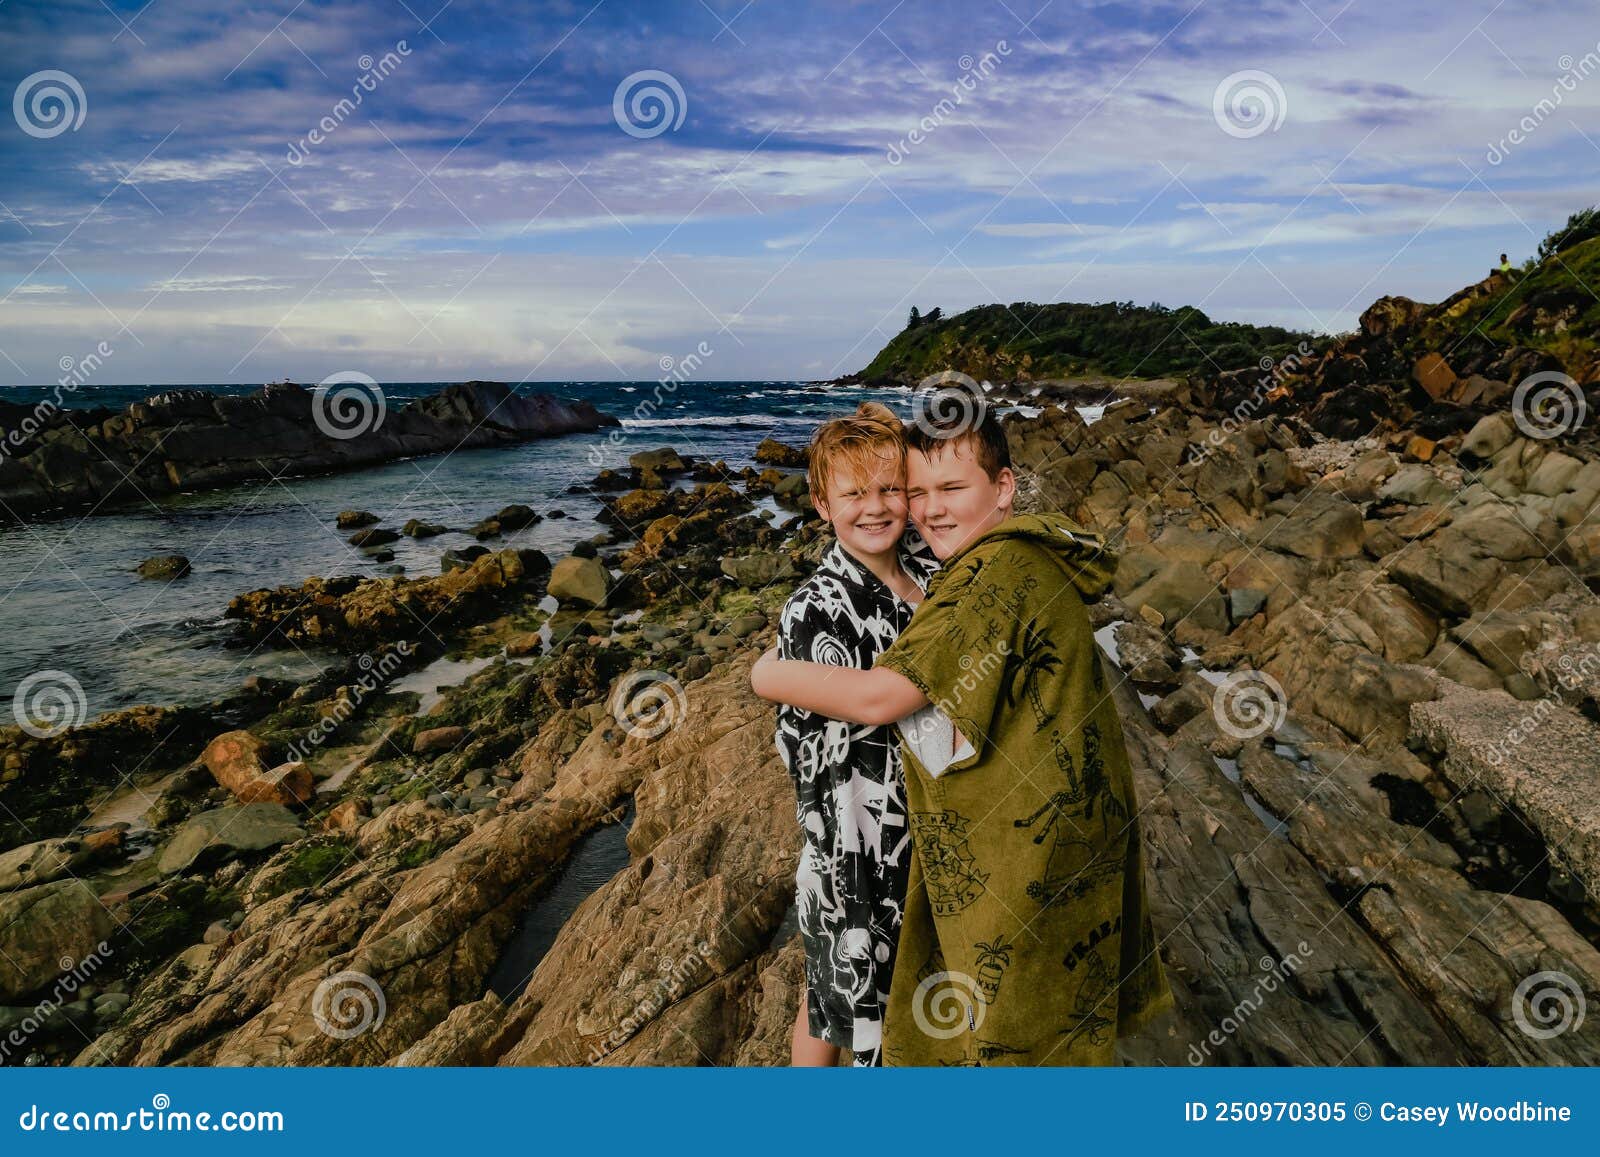 boys wearing hooded towels after swimming mucking around on rocks at the tanks tourist attraction at forster, nsw australia